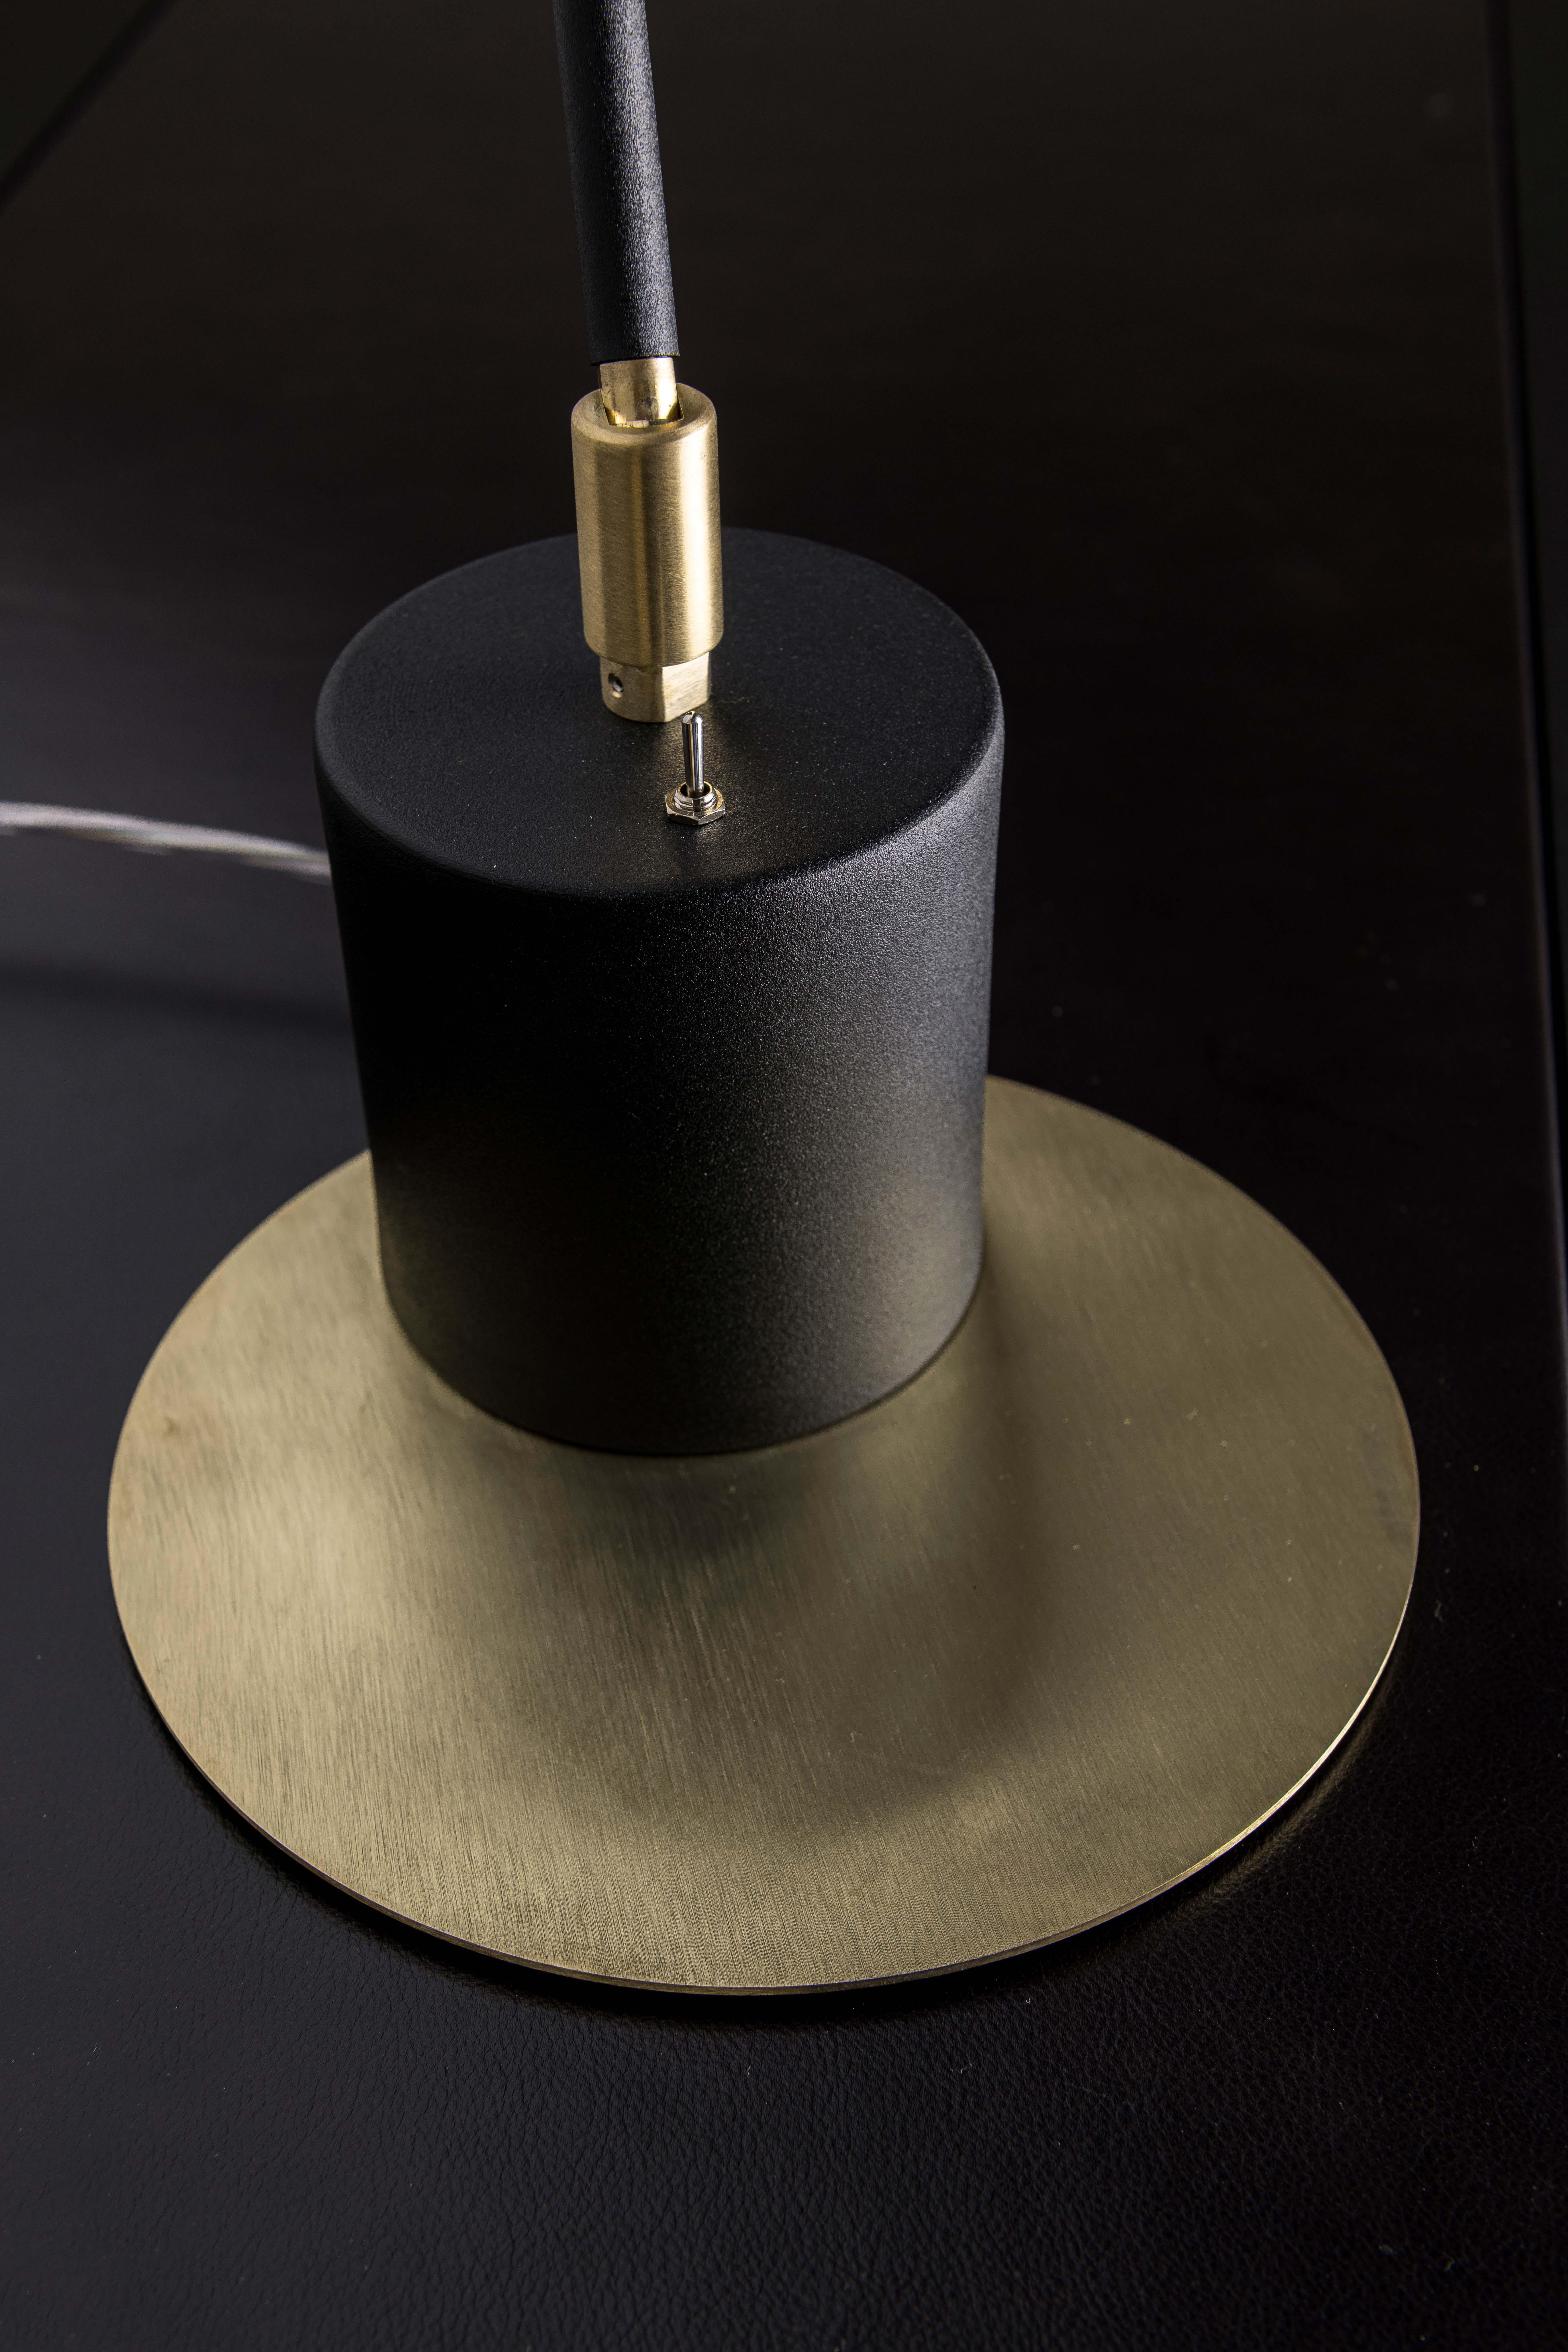 Table lamp with an essential and modern line, embellished with natural satin brass details. Table lamp with matte black powder-coated aluminum frame and lamp body with circular satin brass plate. The joints are made of brushed brass. It can also be